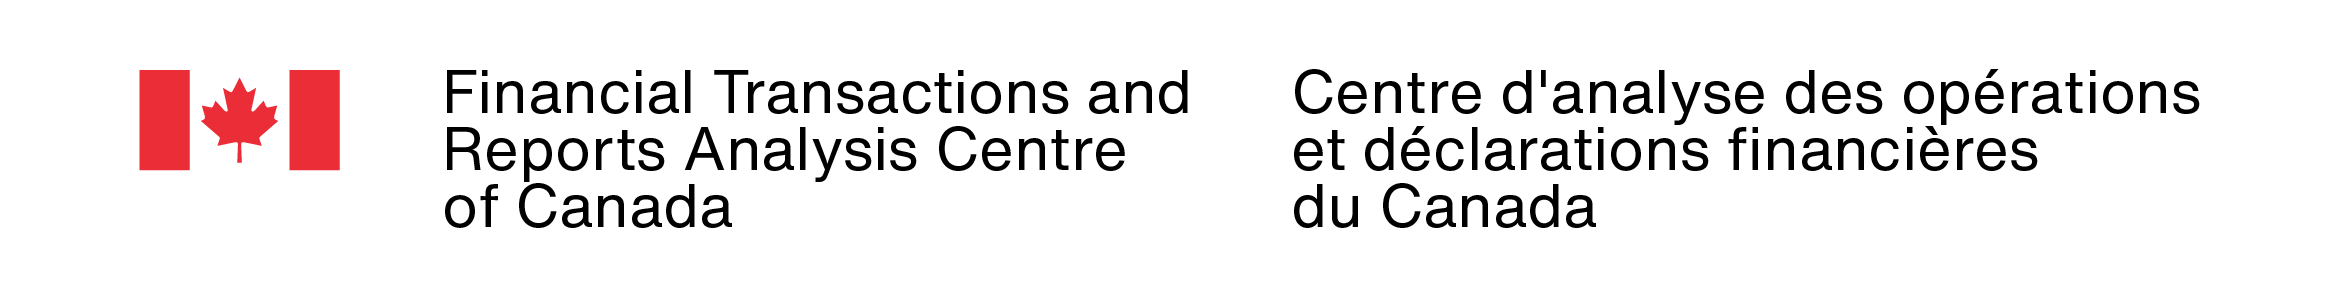 Flag signature for Financial Transactions and Reports Analysis Centre of Canada (3 line flag signature) in its standard colours (black type, FIP red flag symbol)